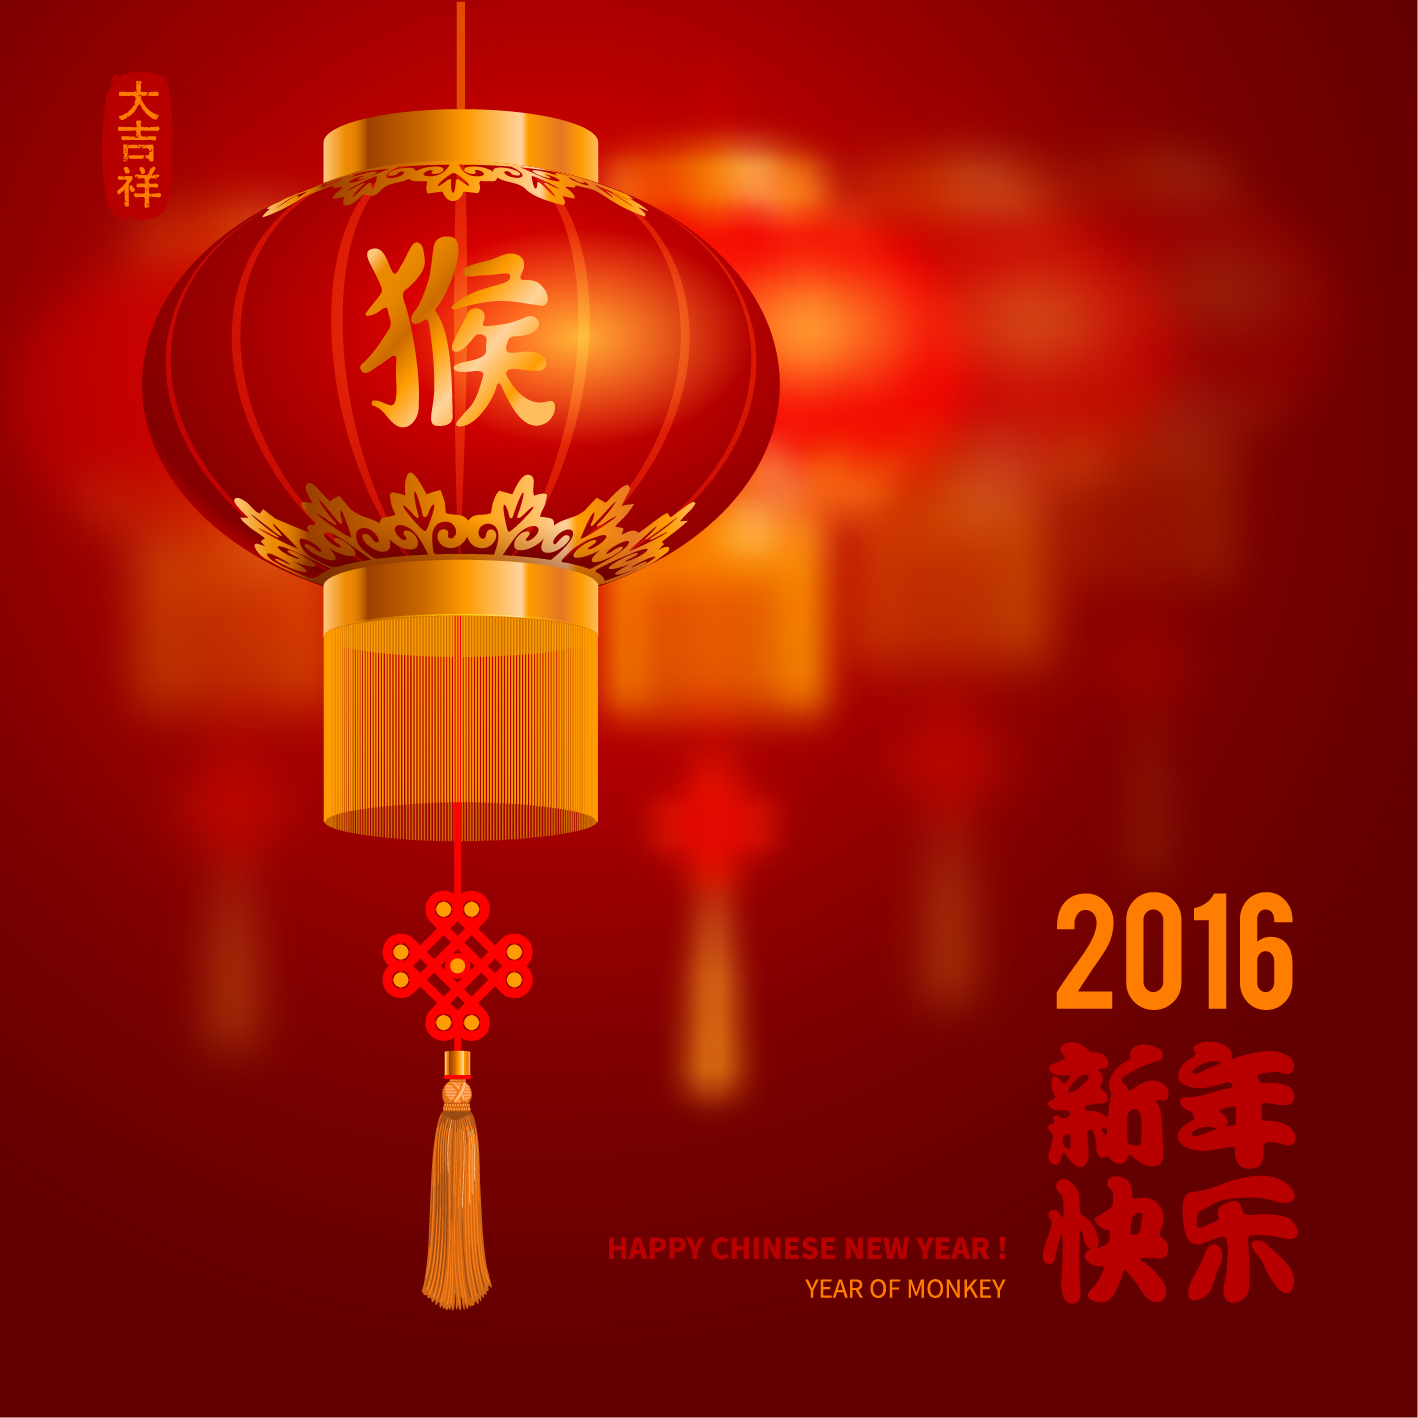 Chinese new year background with red lantern vector 03  